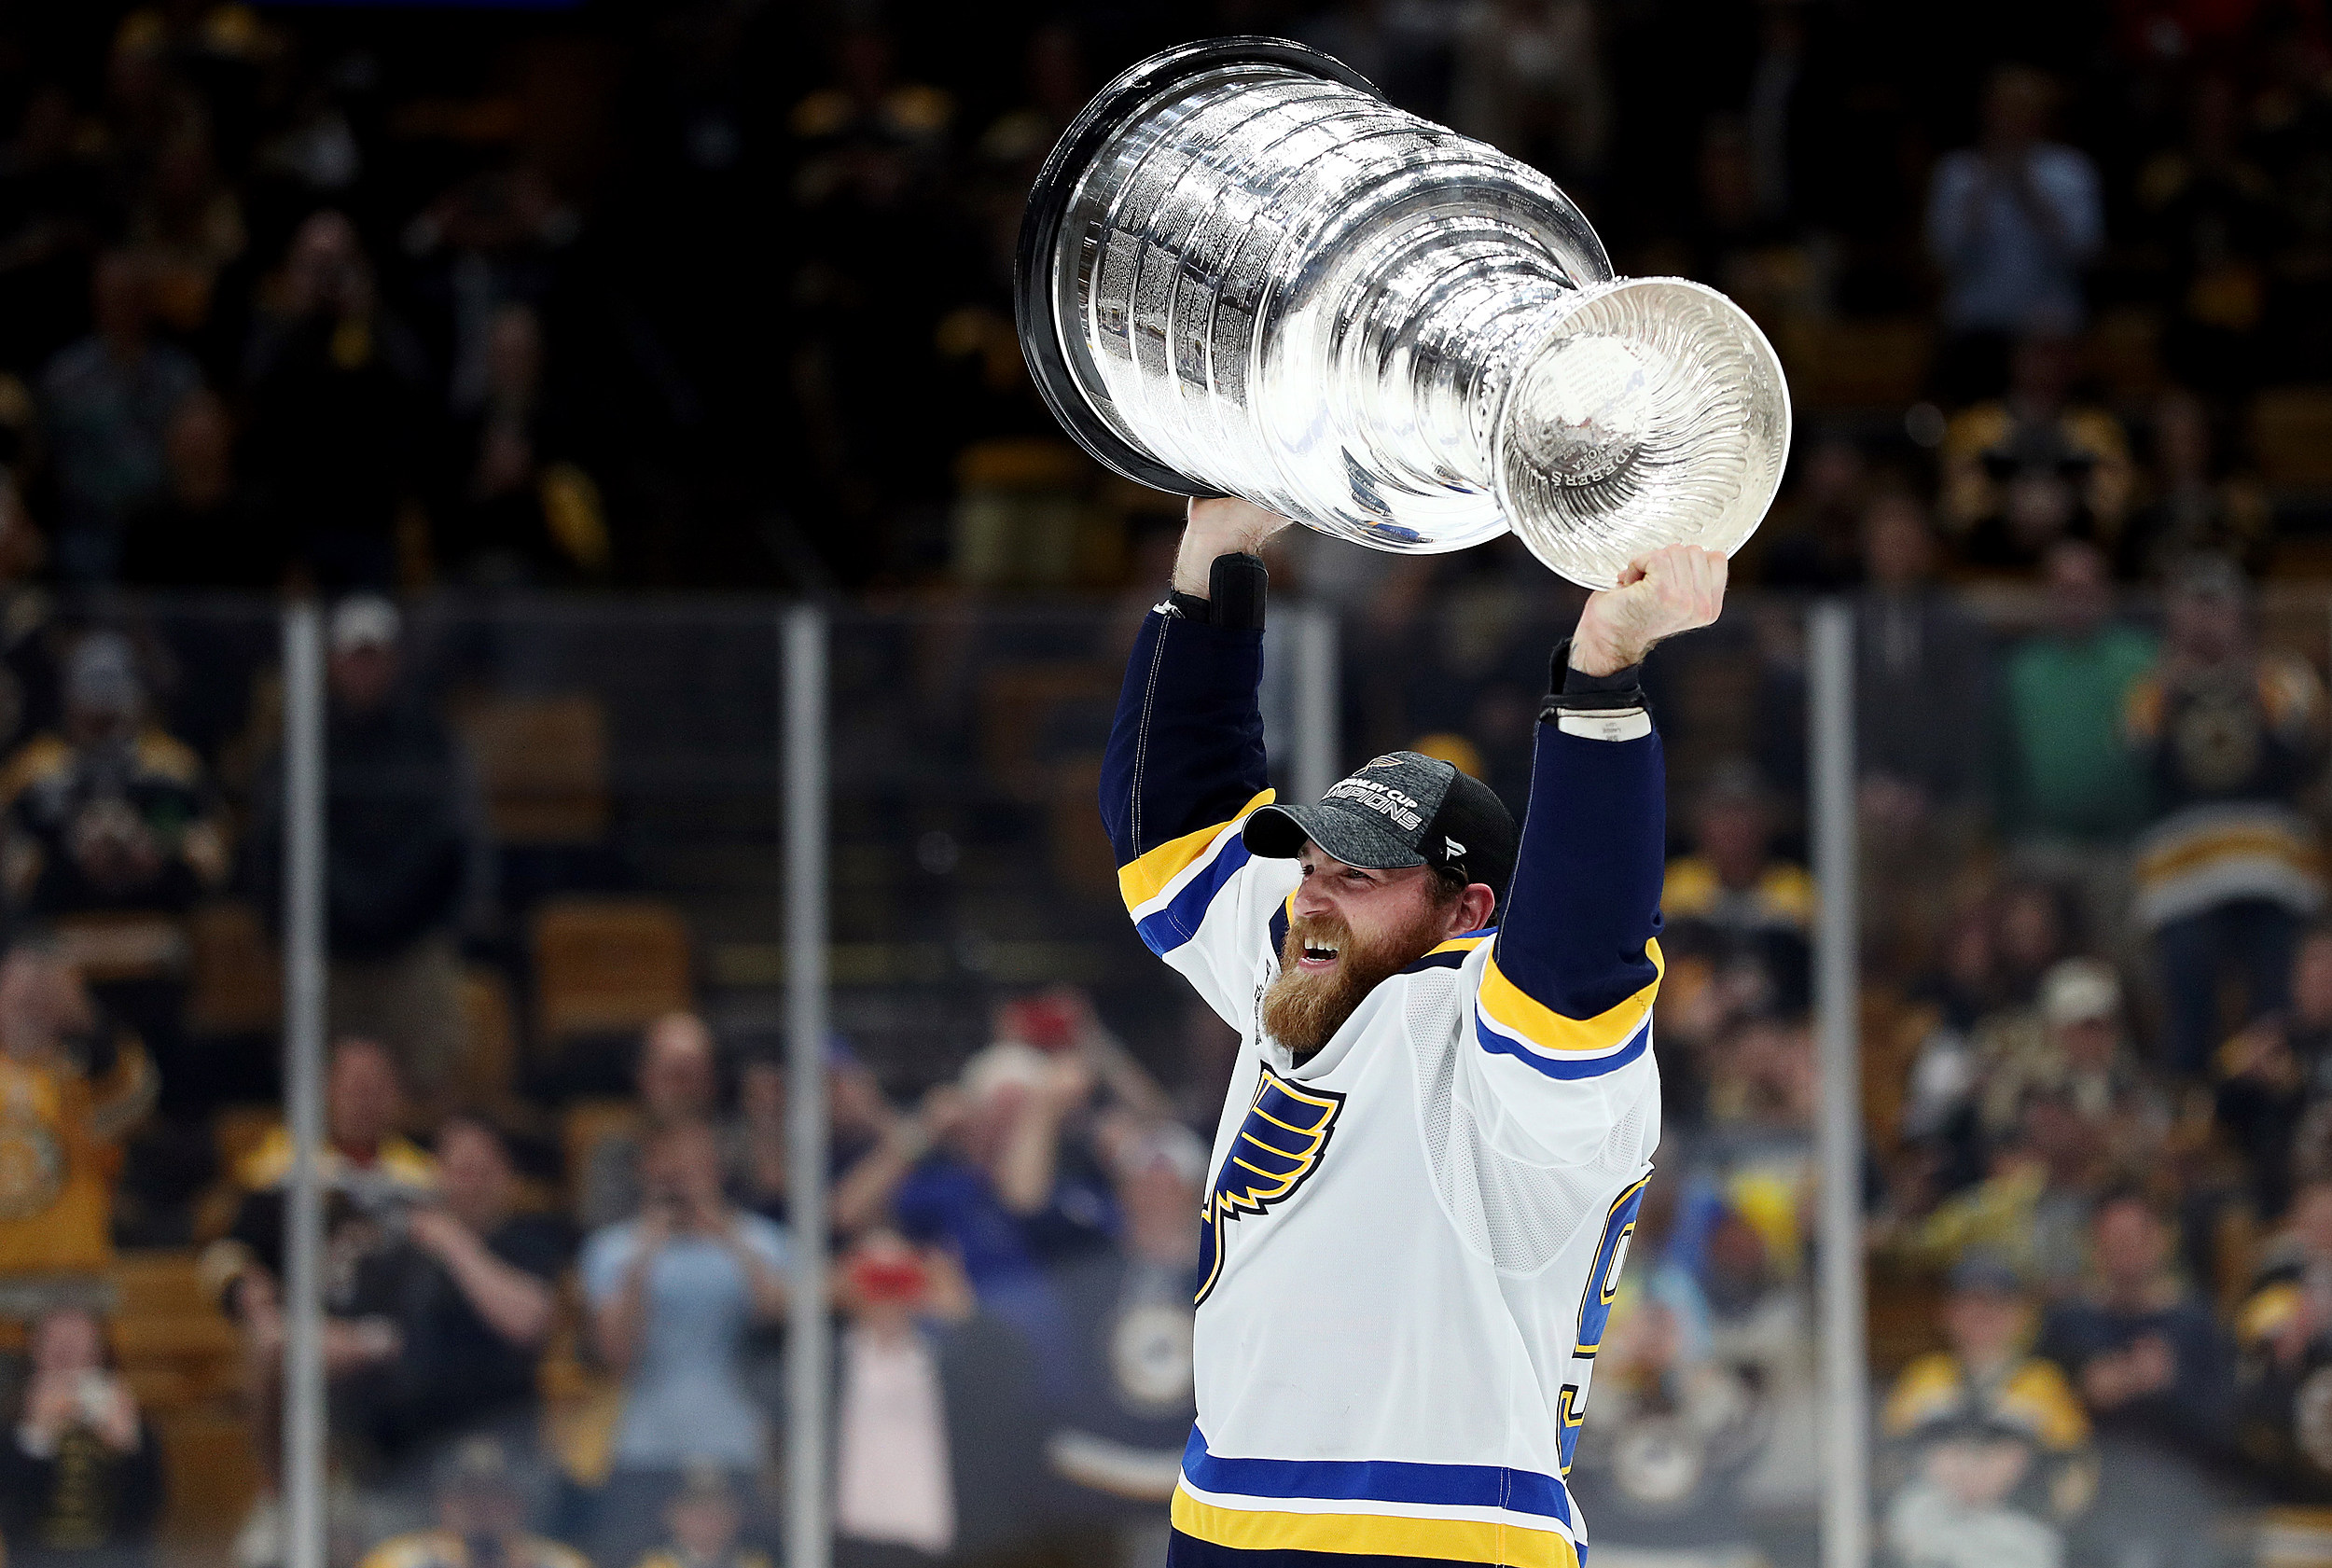 CanOrthoFoundation on X: Play golf with Stanley Cup Winner Ryan O'Reilly.  Once in a lifetime experience! Bid on it in Bad to the Bone #COFAuction.  Bidding closes on Friday at 8:00 pm